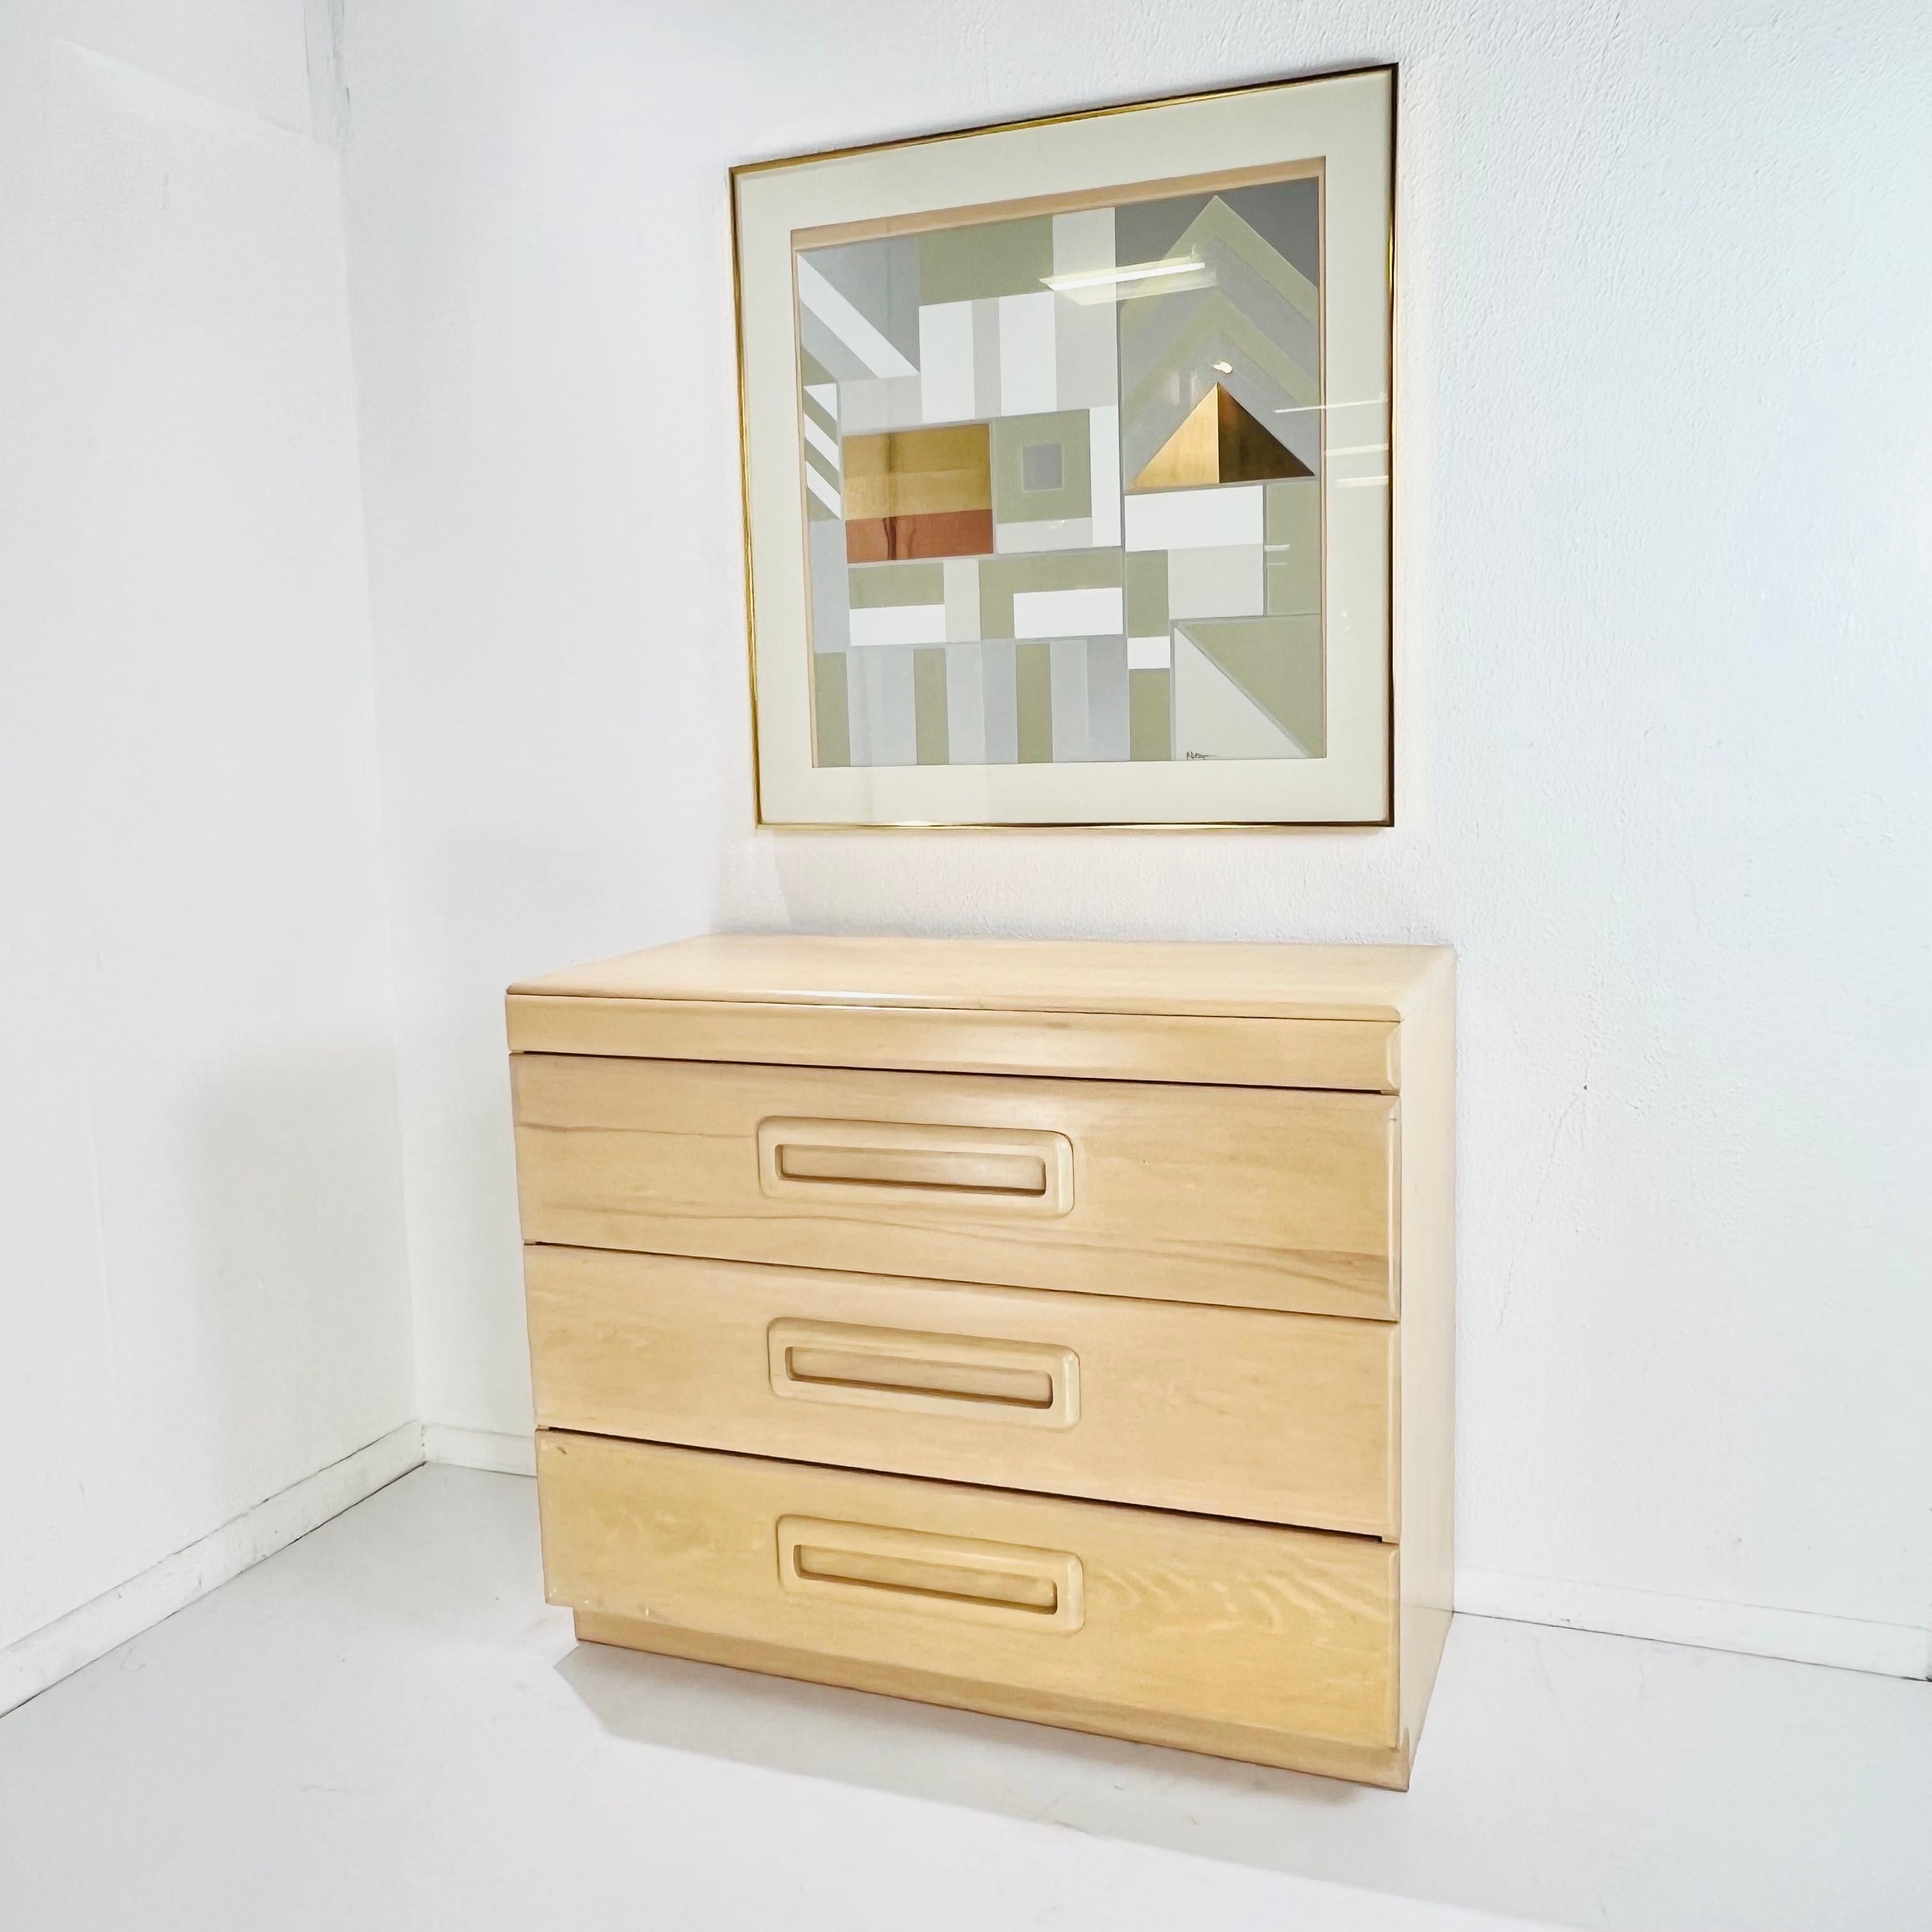 Iconic early 20th century American modernist blonde maple dresser featuring drawers with wooden pulls and dovetail joints, designed by Russel Wright for Conant Ball, circa 1940. Beginning in the late 1920s through the 1960s, Russel Wright created a